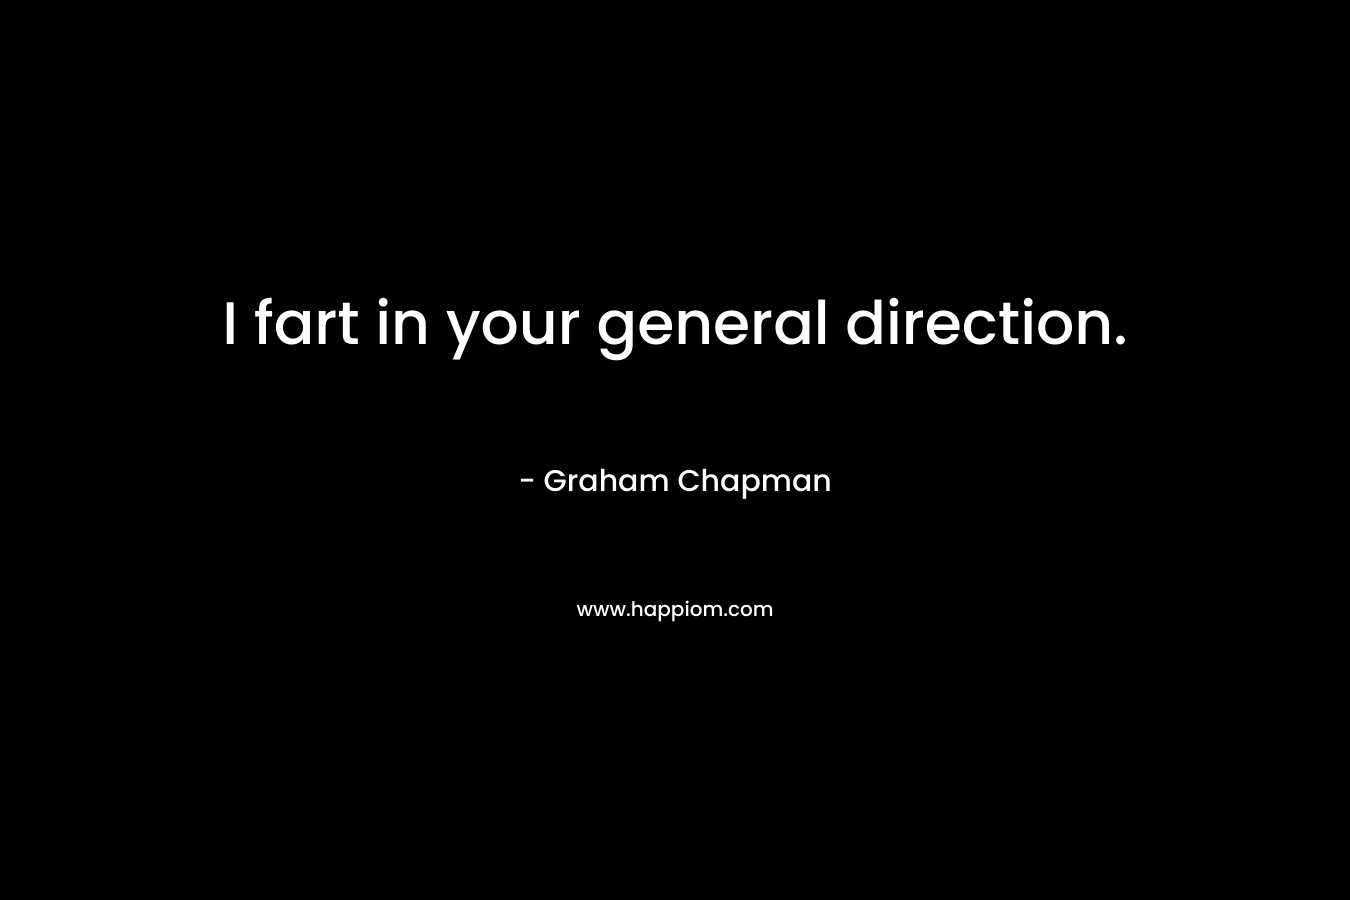 I fart in your general direction. – Graham Chapman